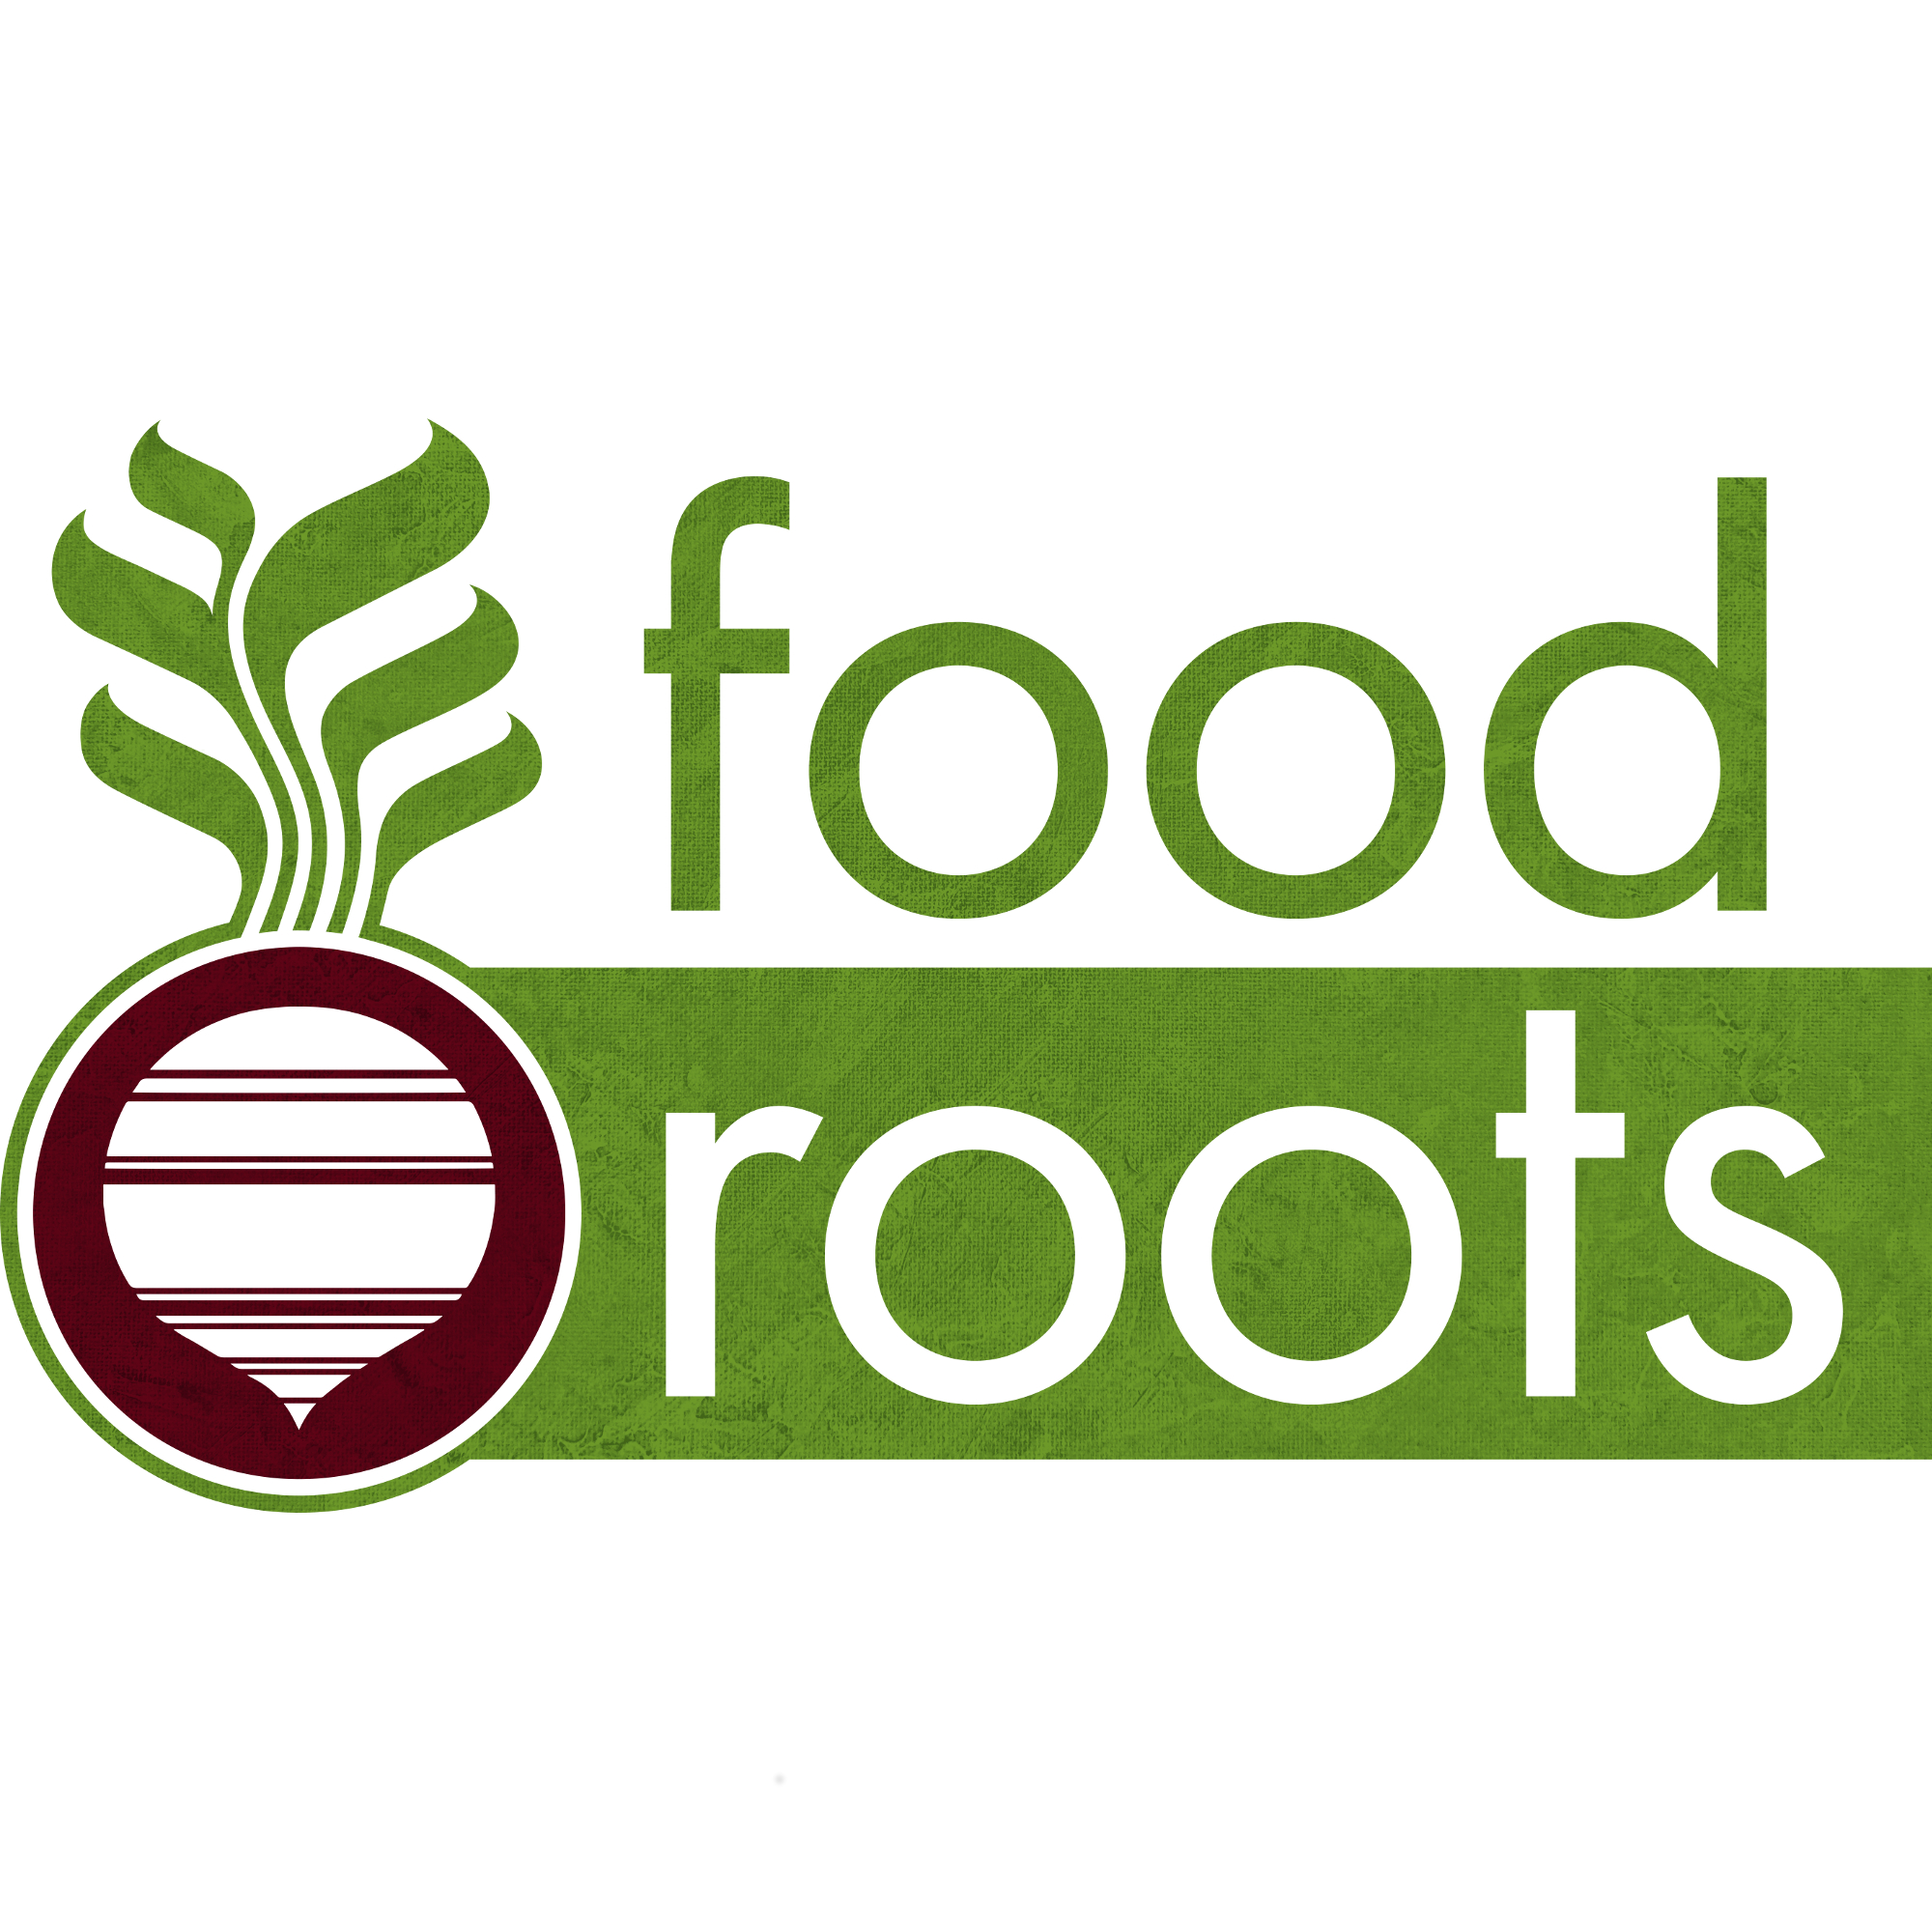 Food Roots